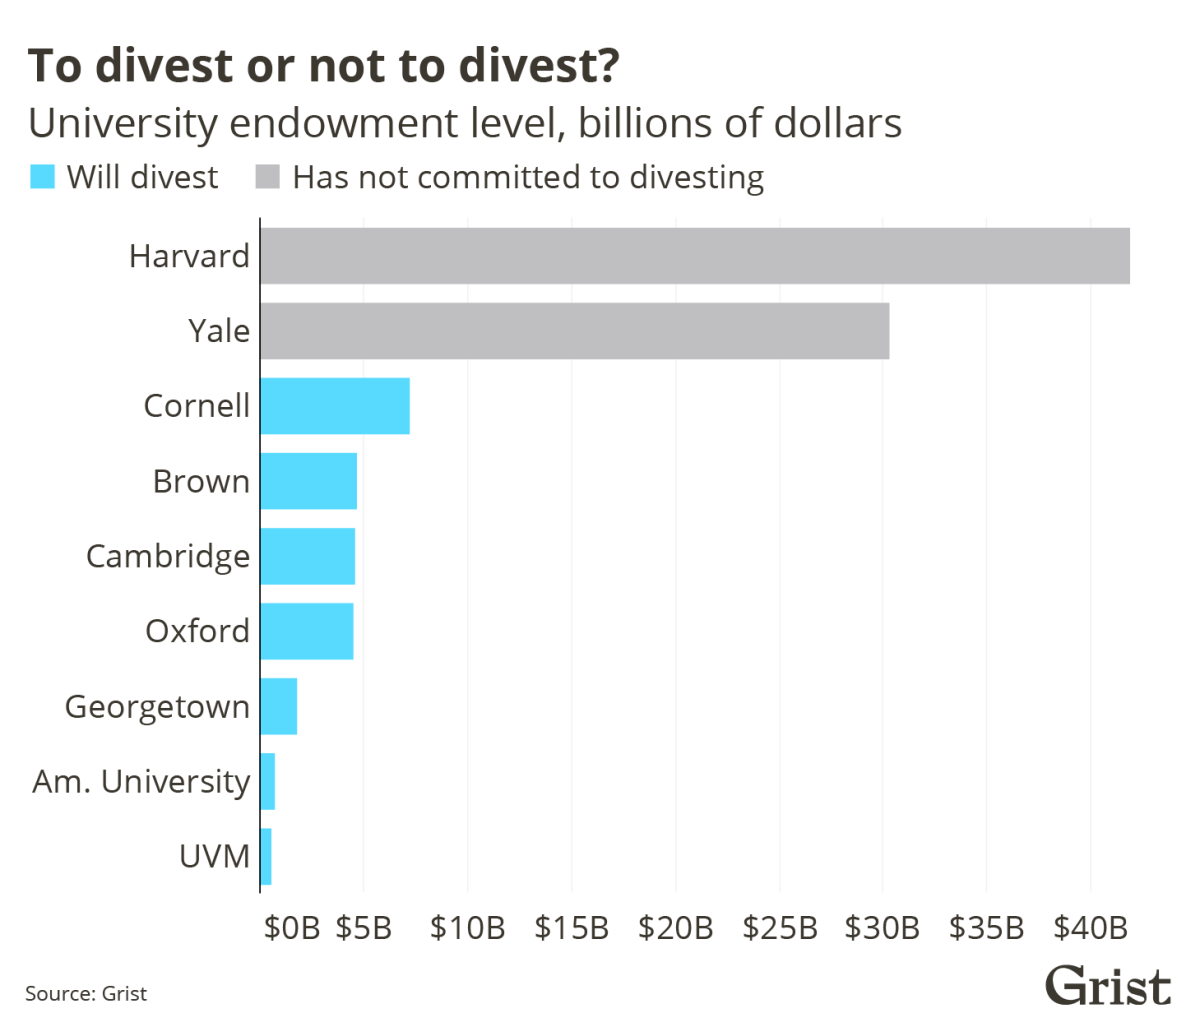 A bar chart showing divestment decisions by level of university endowment (in billions of dollars). Harvard and Yale have the largest endowments of the universities shown — but have not committed to divesting.